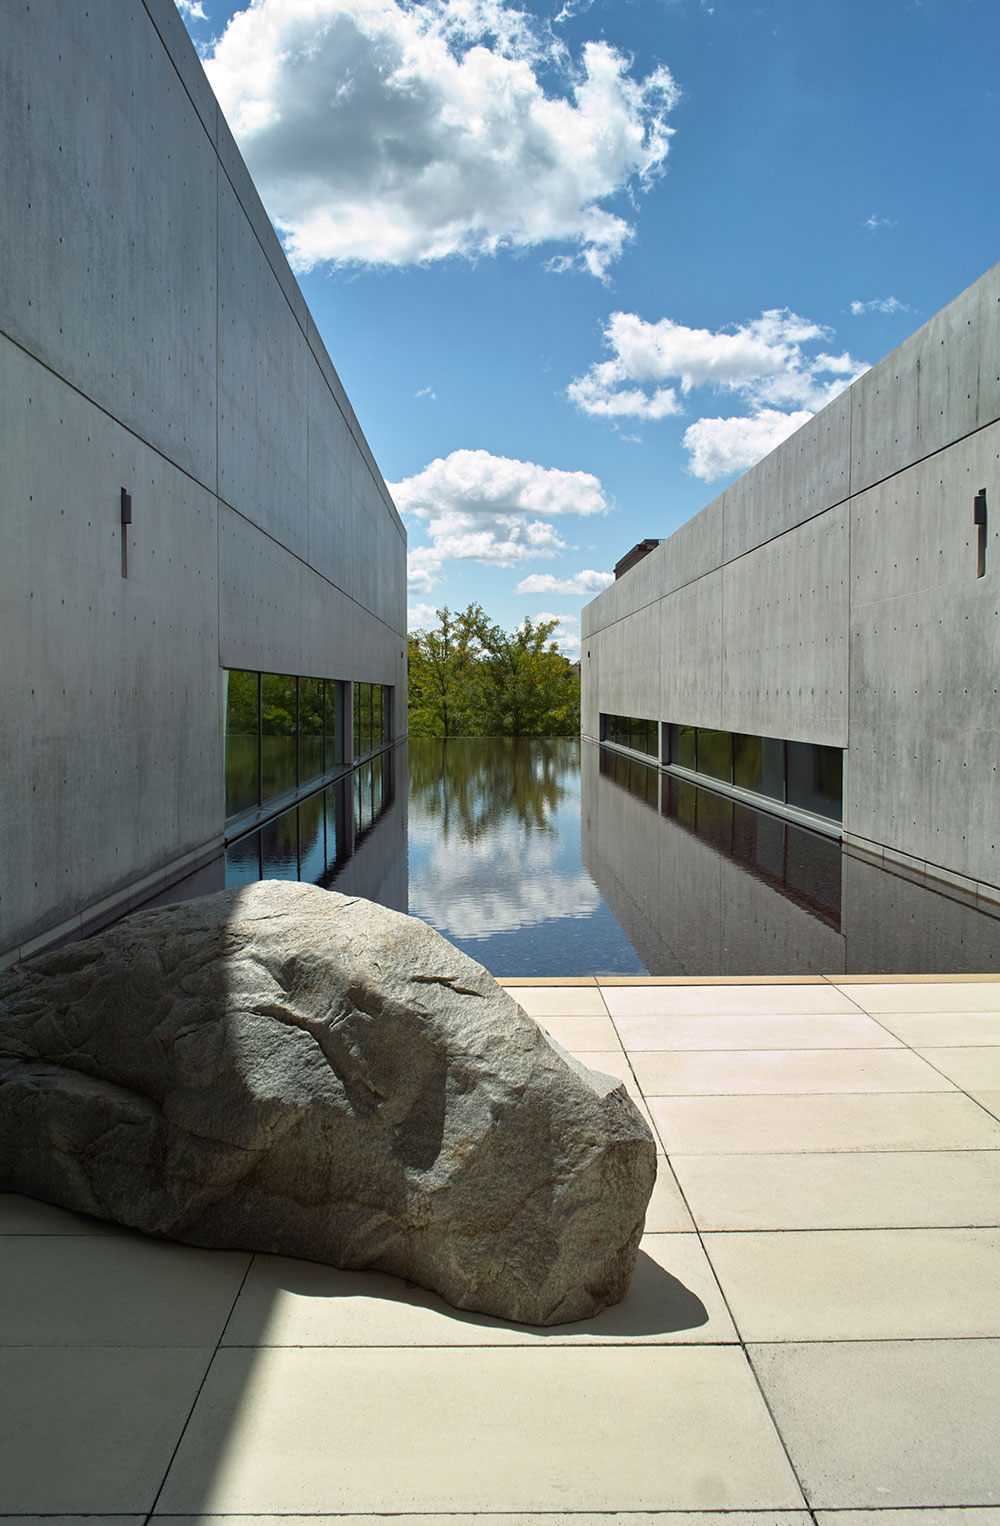 Reflecting pool at the Pulitzer Foundation for the Arts by Tadao Ando, St. Louis.